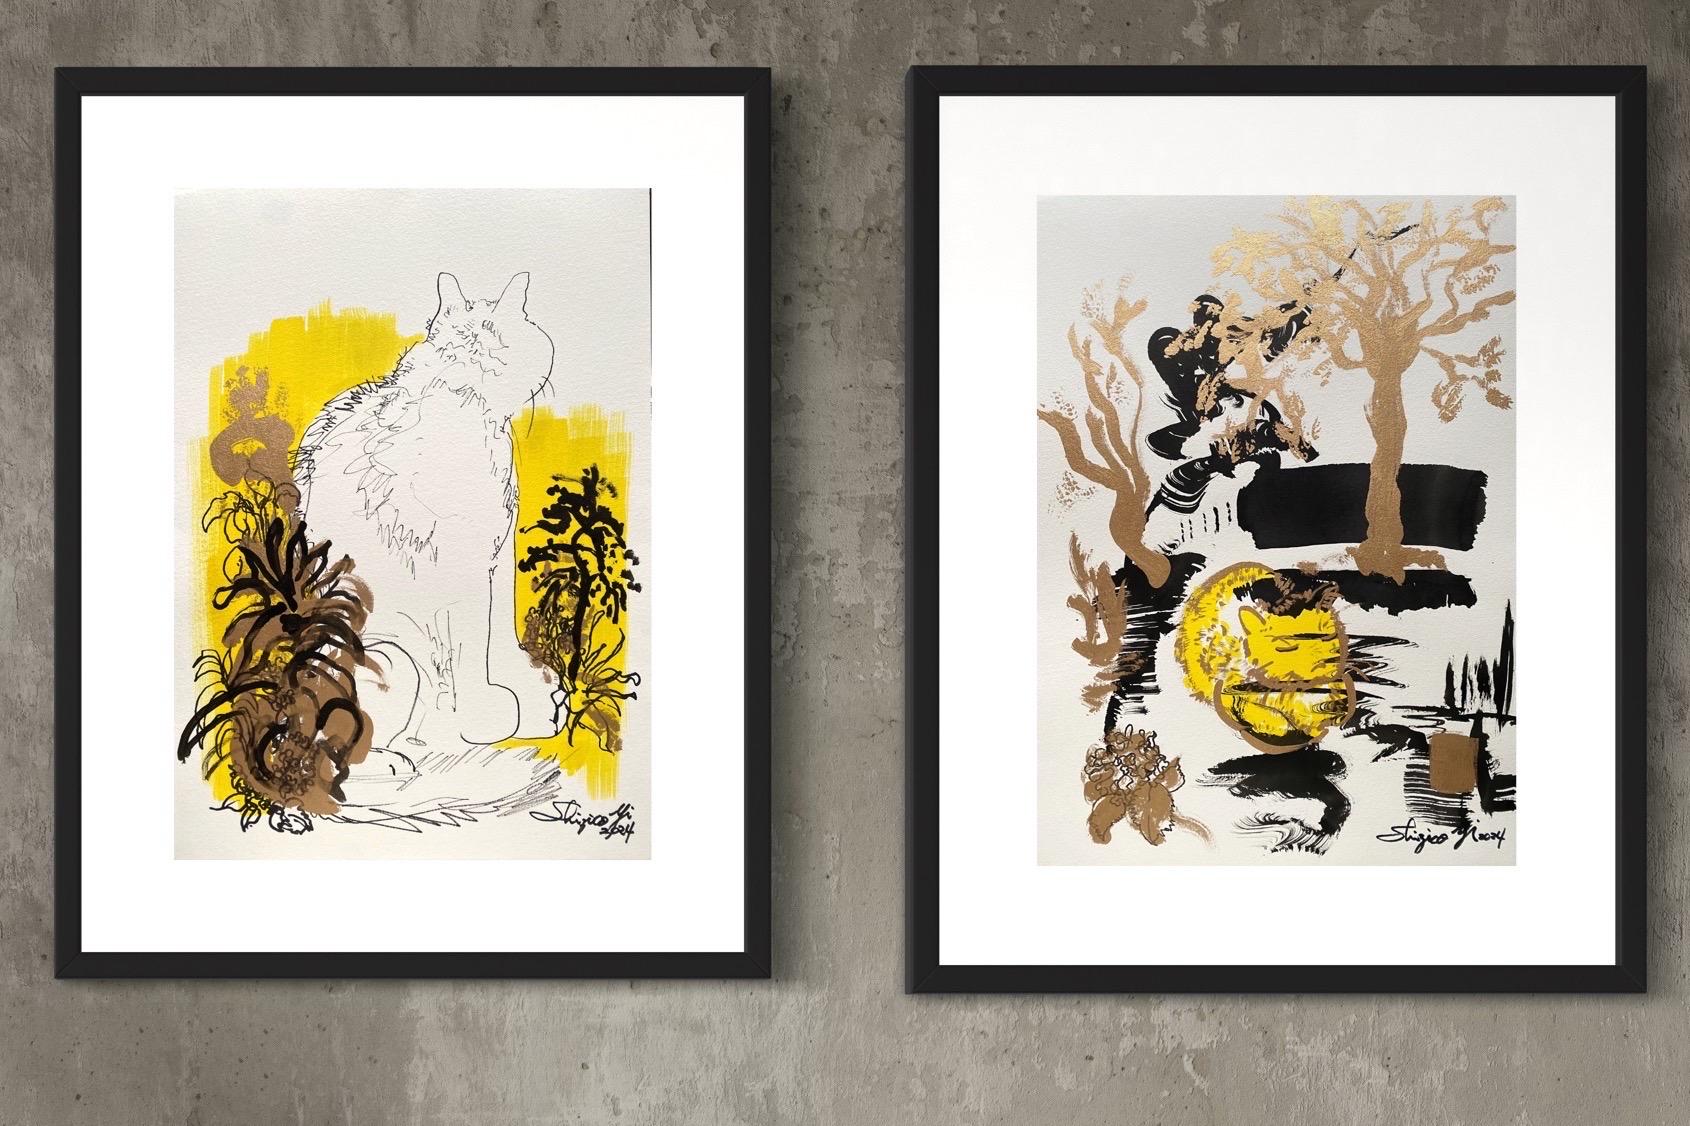 Original Set-Breakfast with Cat Series-British Award Artist-Gold, ink on papers For Sale 18